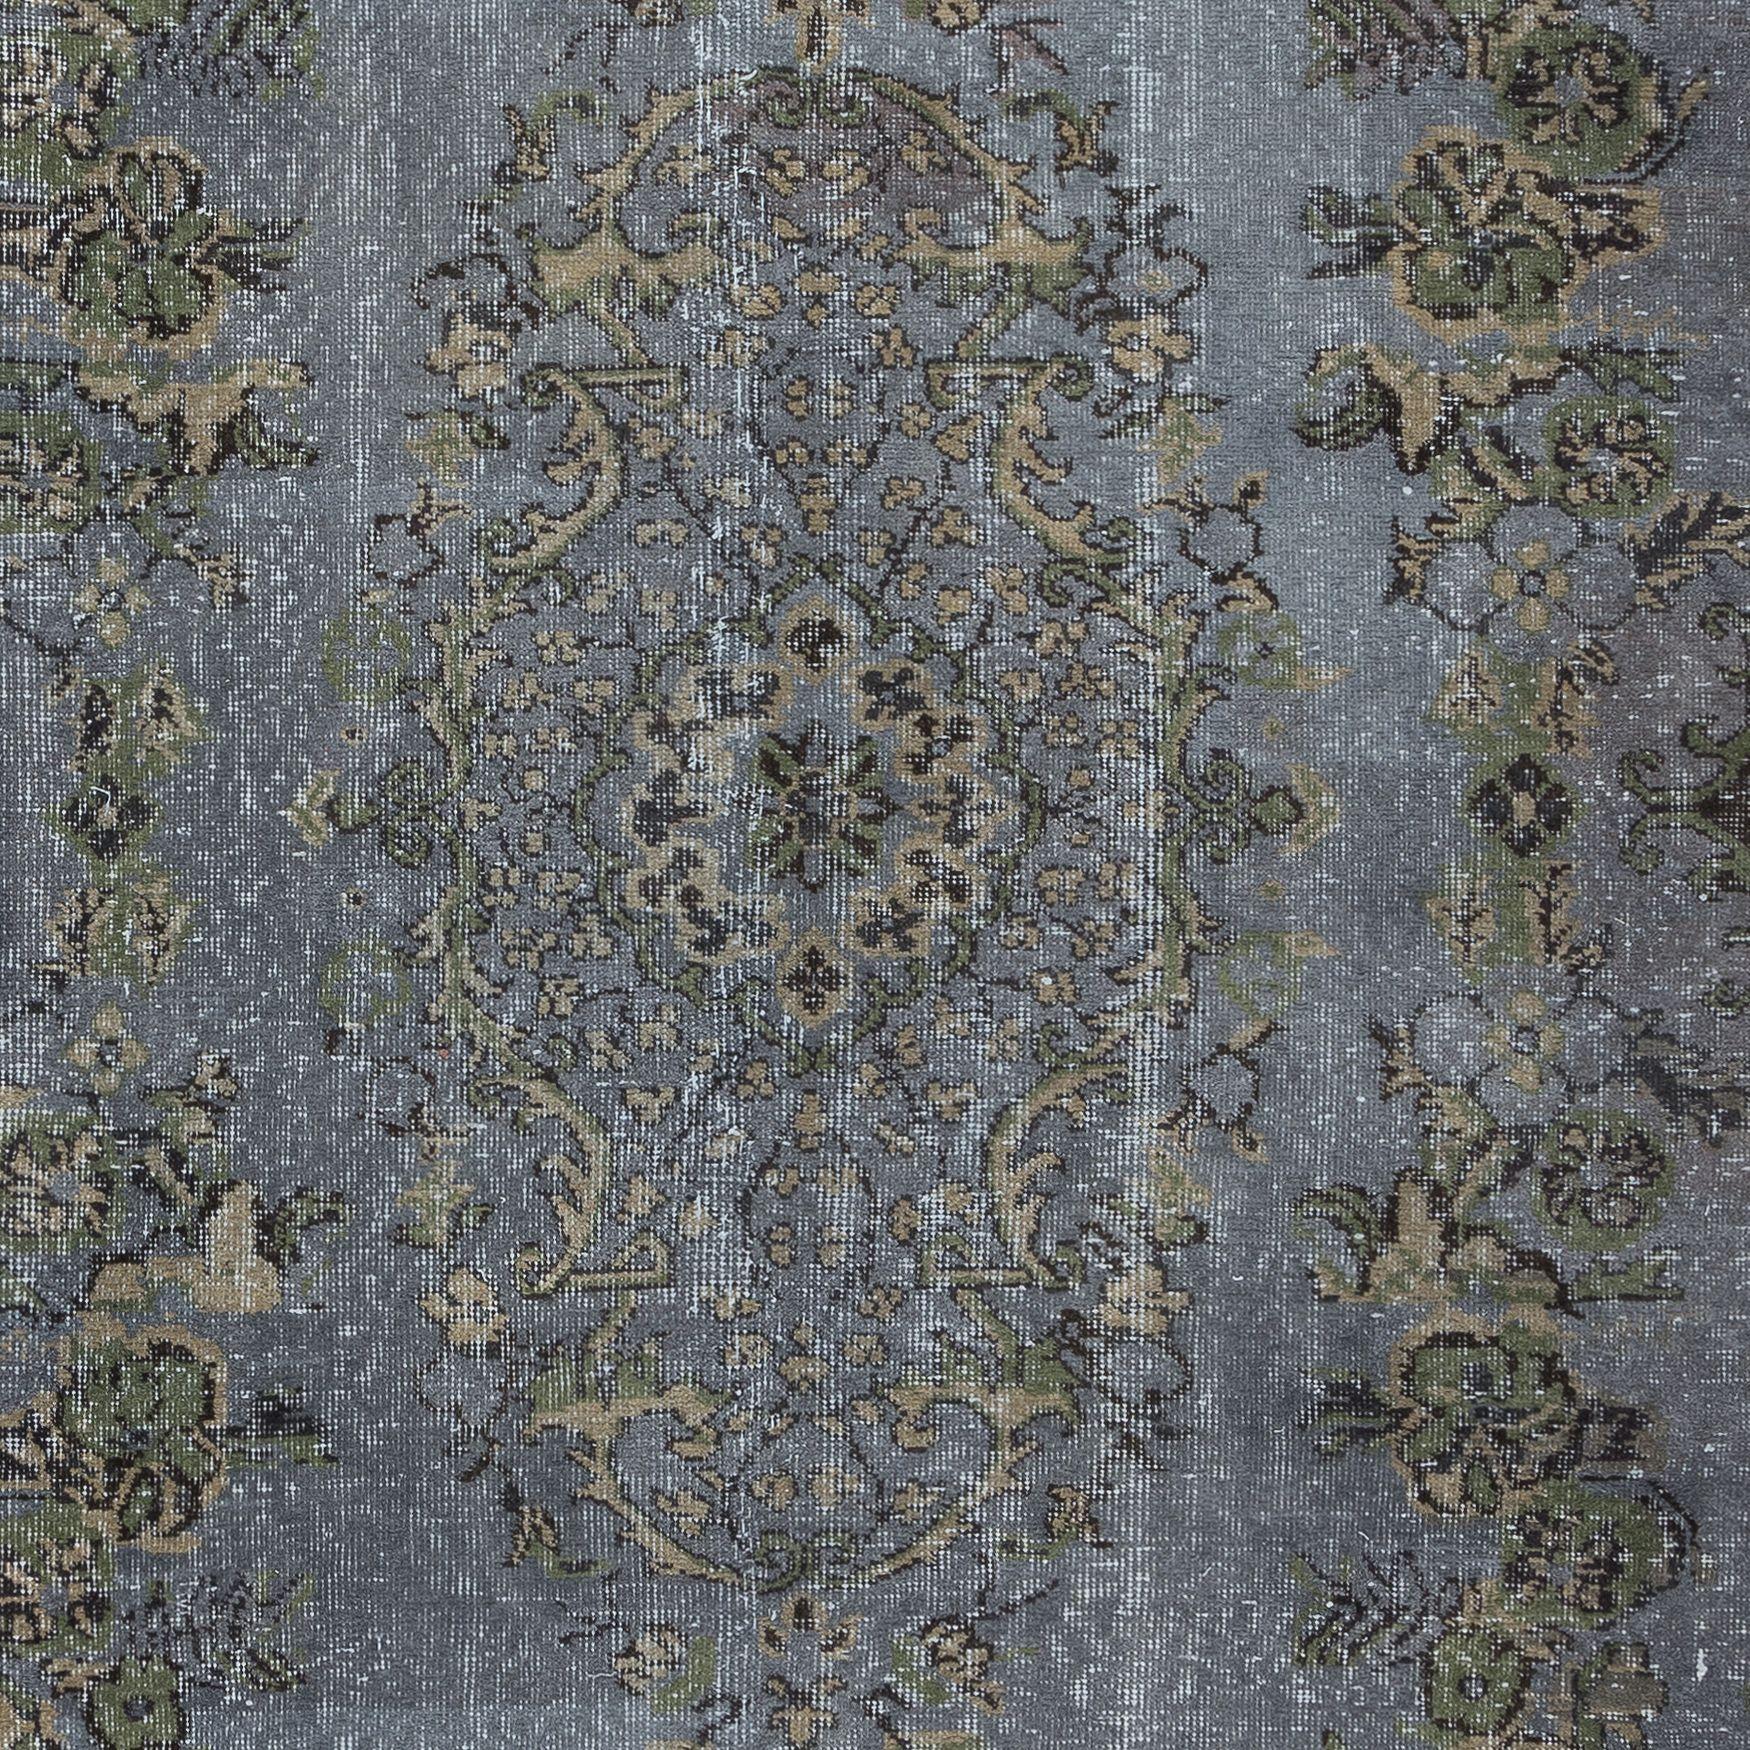 Tissé à la main 5.7x9.8 Ft Hand Made Turkish Rug with Medallion in Iron Gray, Beige & Army Greene en vente